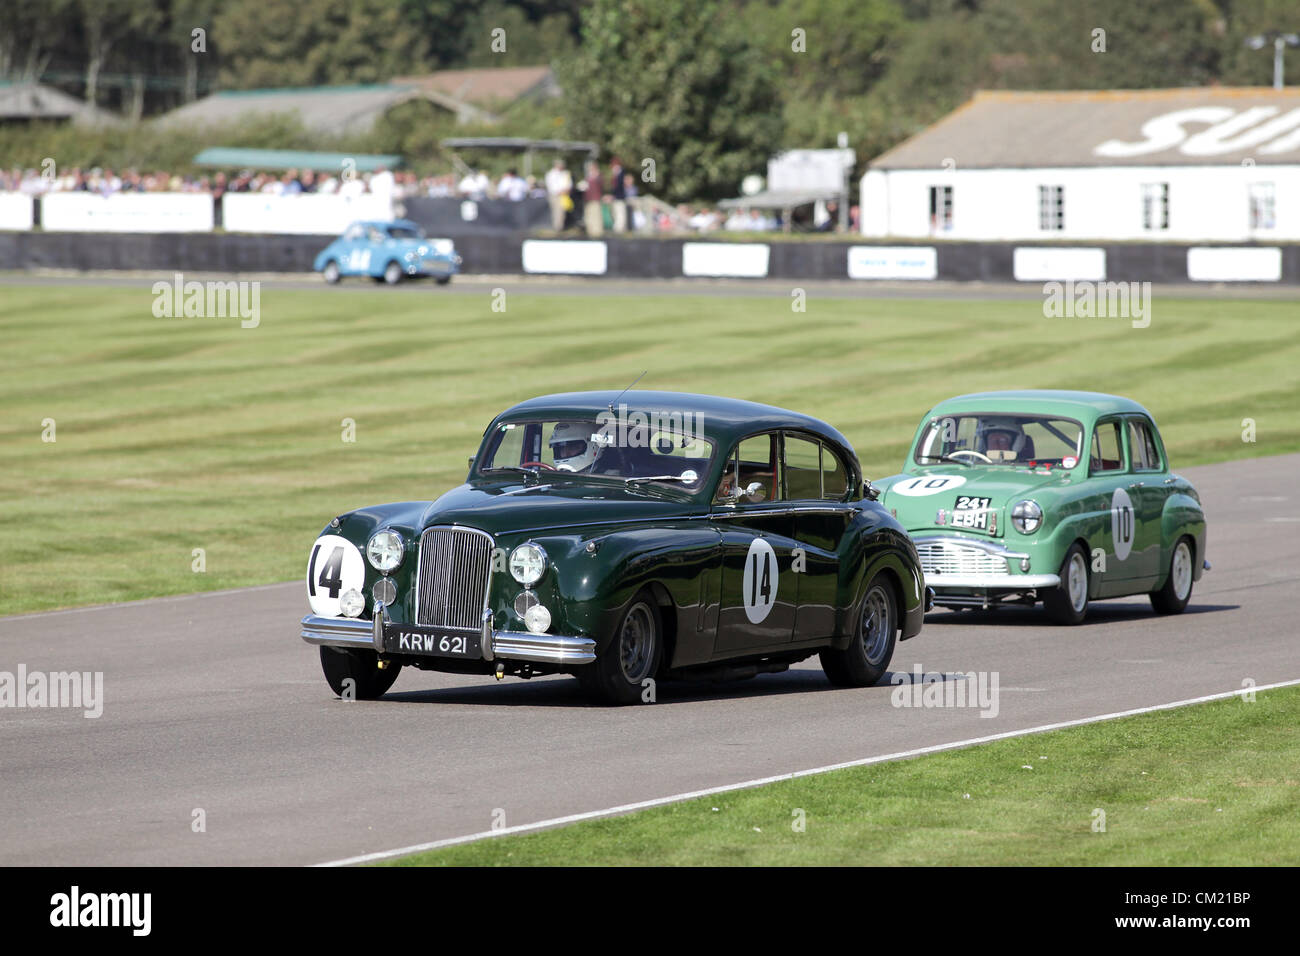 Goodwood Estate, Chichester, UK. 15th September 2012. Rowan Atkinson driving a Jaguar MkV11 is chased by Rauno Aaltonen in a Standard Ten during the St Mary's Trophy at the Goodwood Revival. The revival is a 'magical step back in time', showcasing a mixture of cars and aviation from the 40's, 50's and 60's and is one of the most popular historical motor racing events in the world. For more information visit www.goodwood.co.uk/revival. Stock Photo